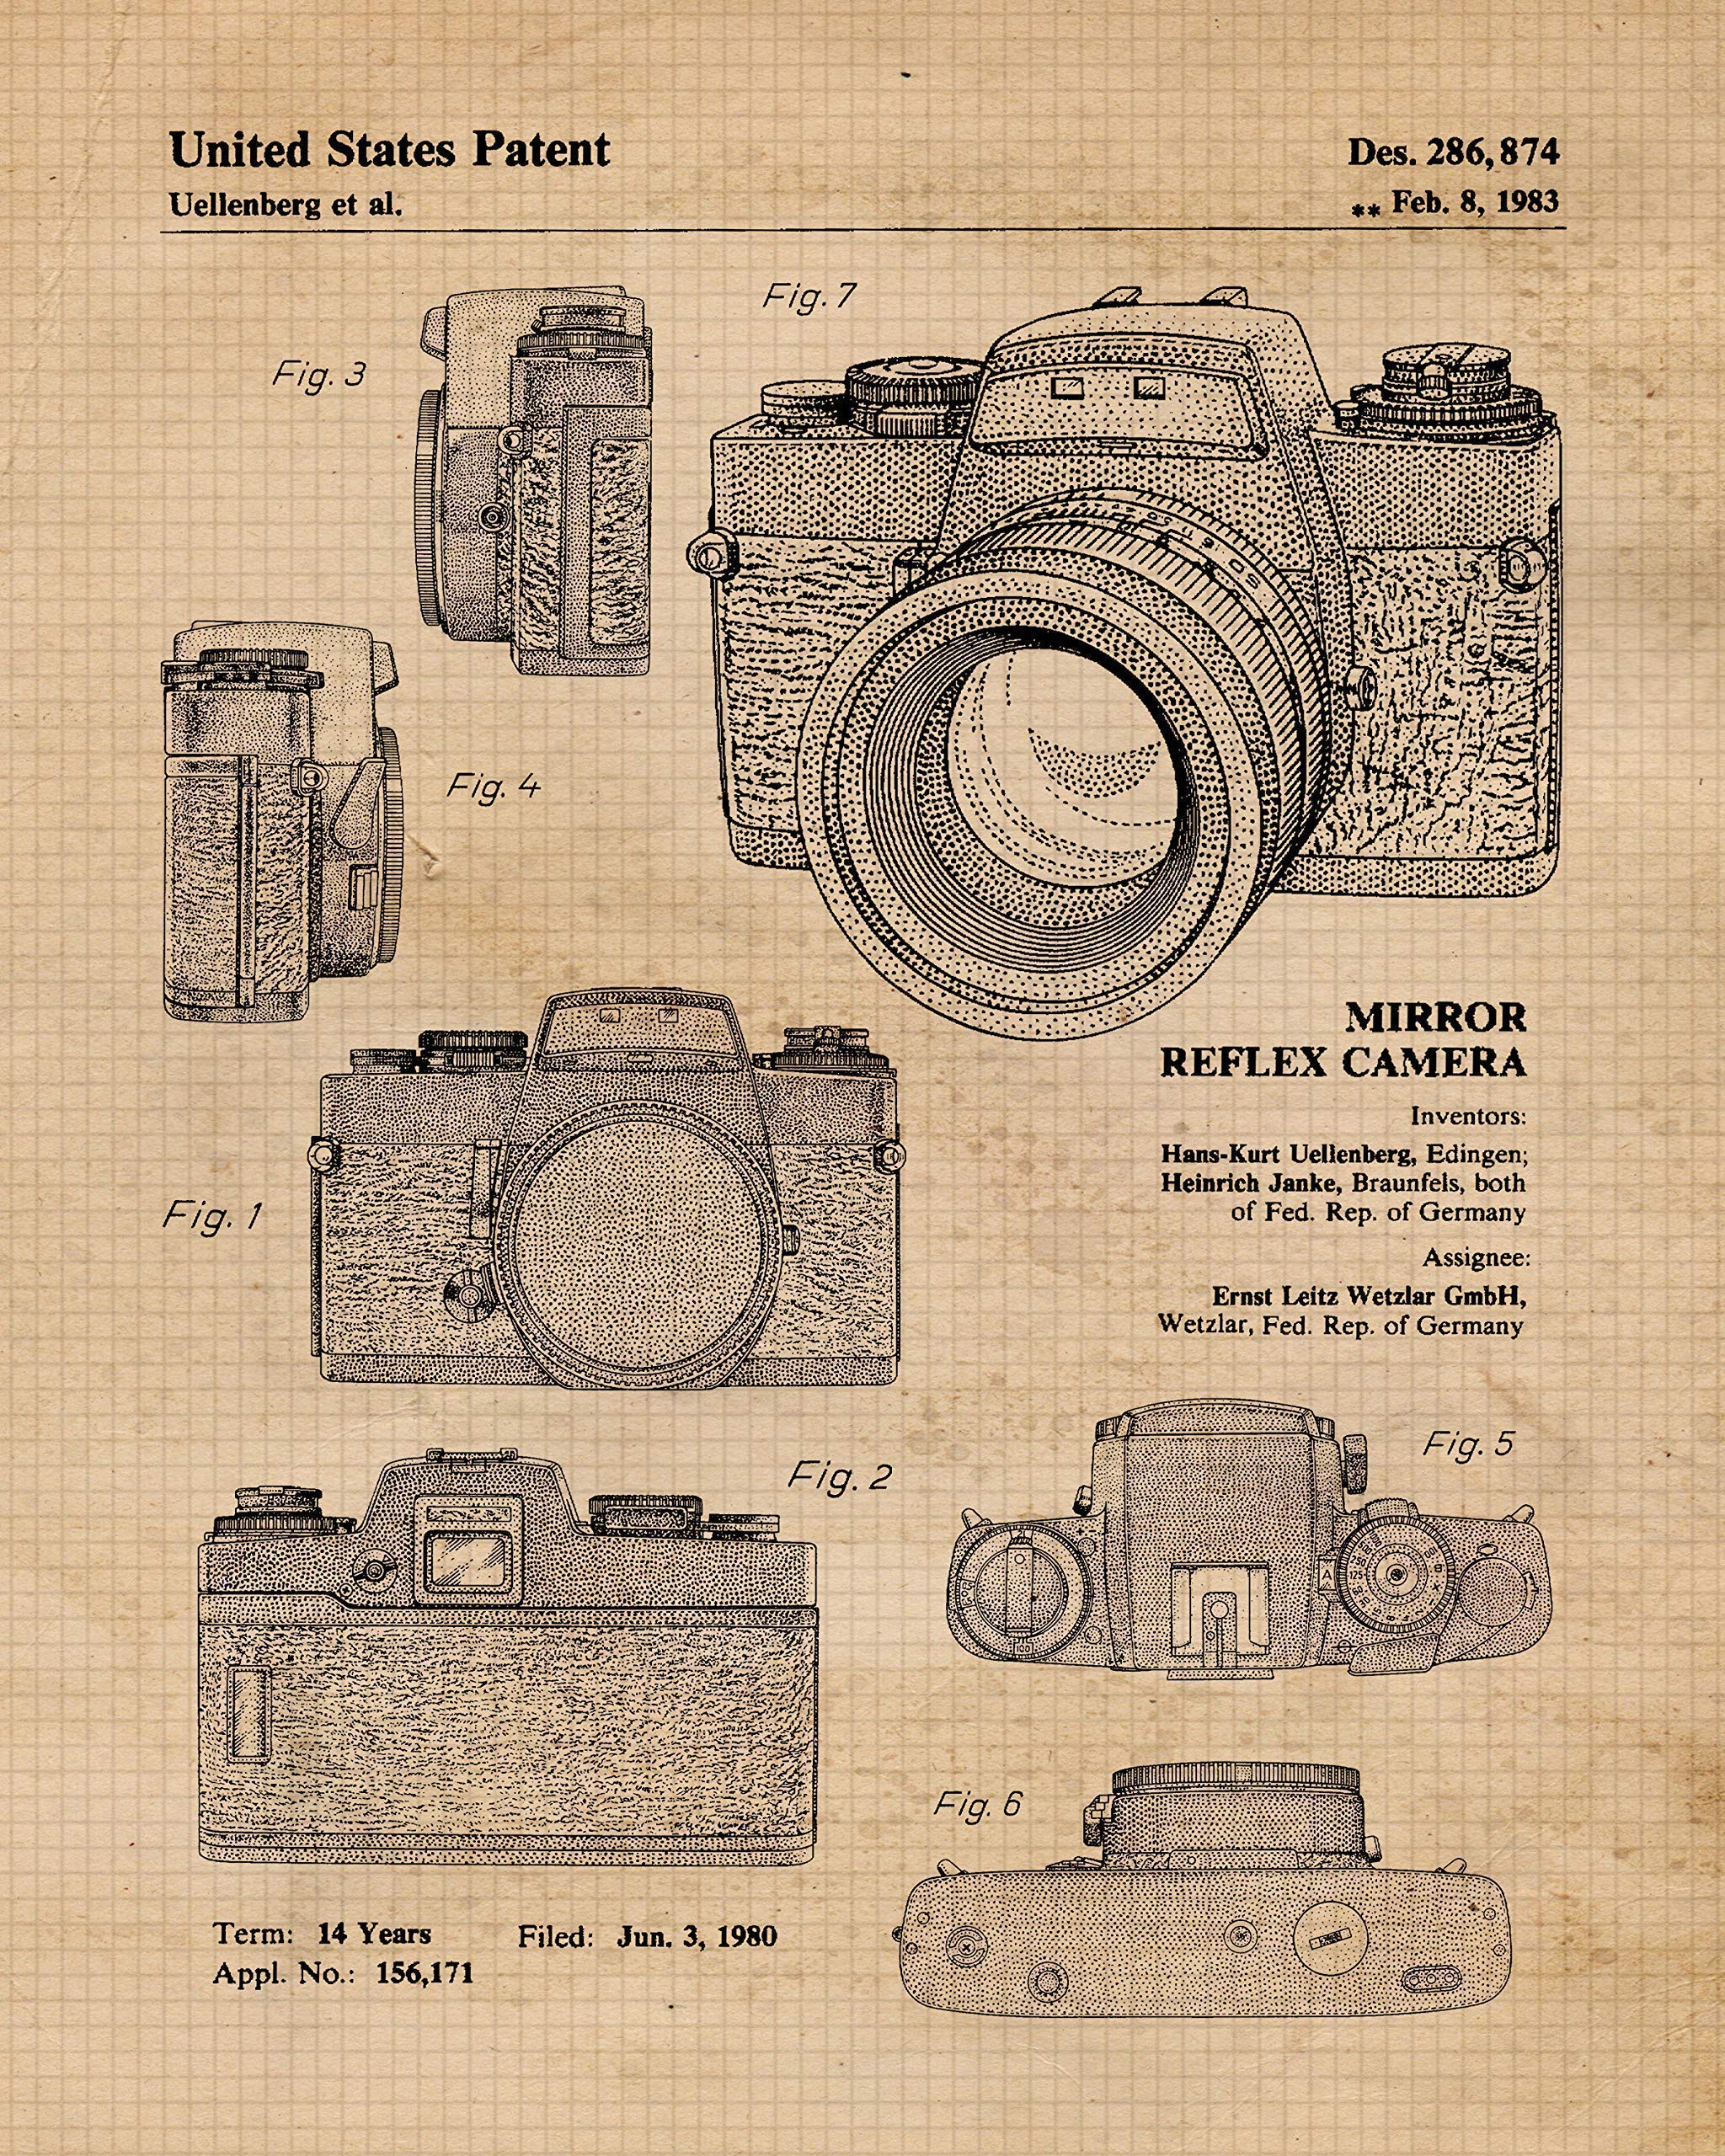 Vintage Classic M3 R4 Camera Patent Prints, 4 (8x10) Unframed Photos, Wall Art Decor Gifts Under 20 for Home Office Man Cave School Lab College Student Teacher Leica Rollei Photography Sports Champs